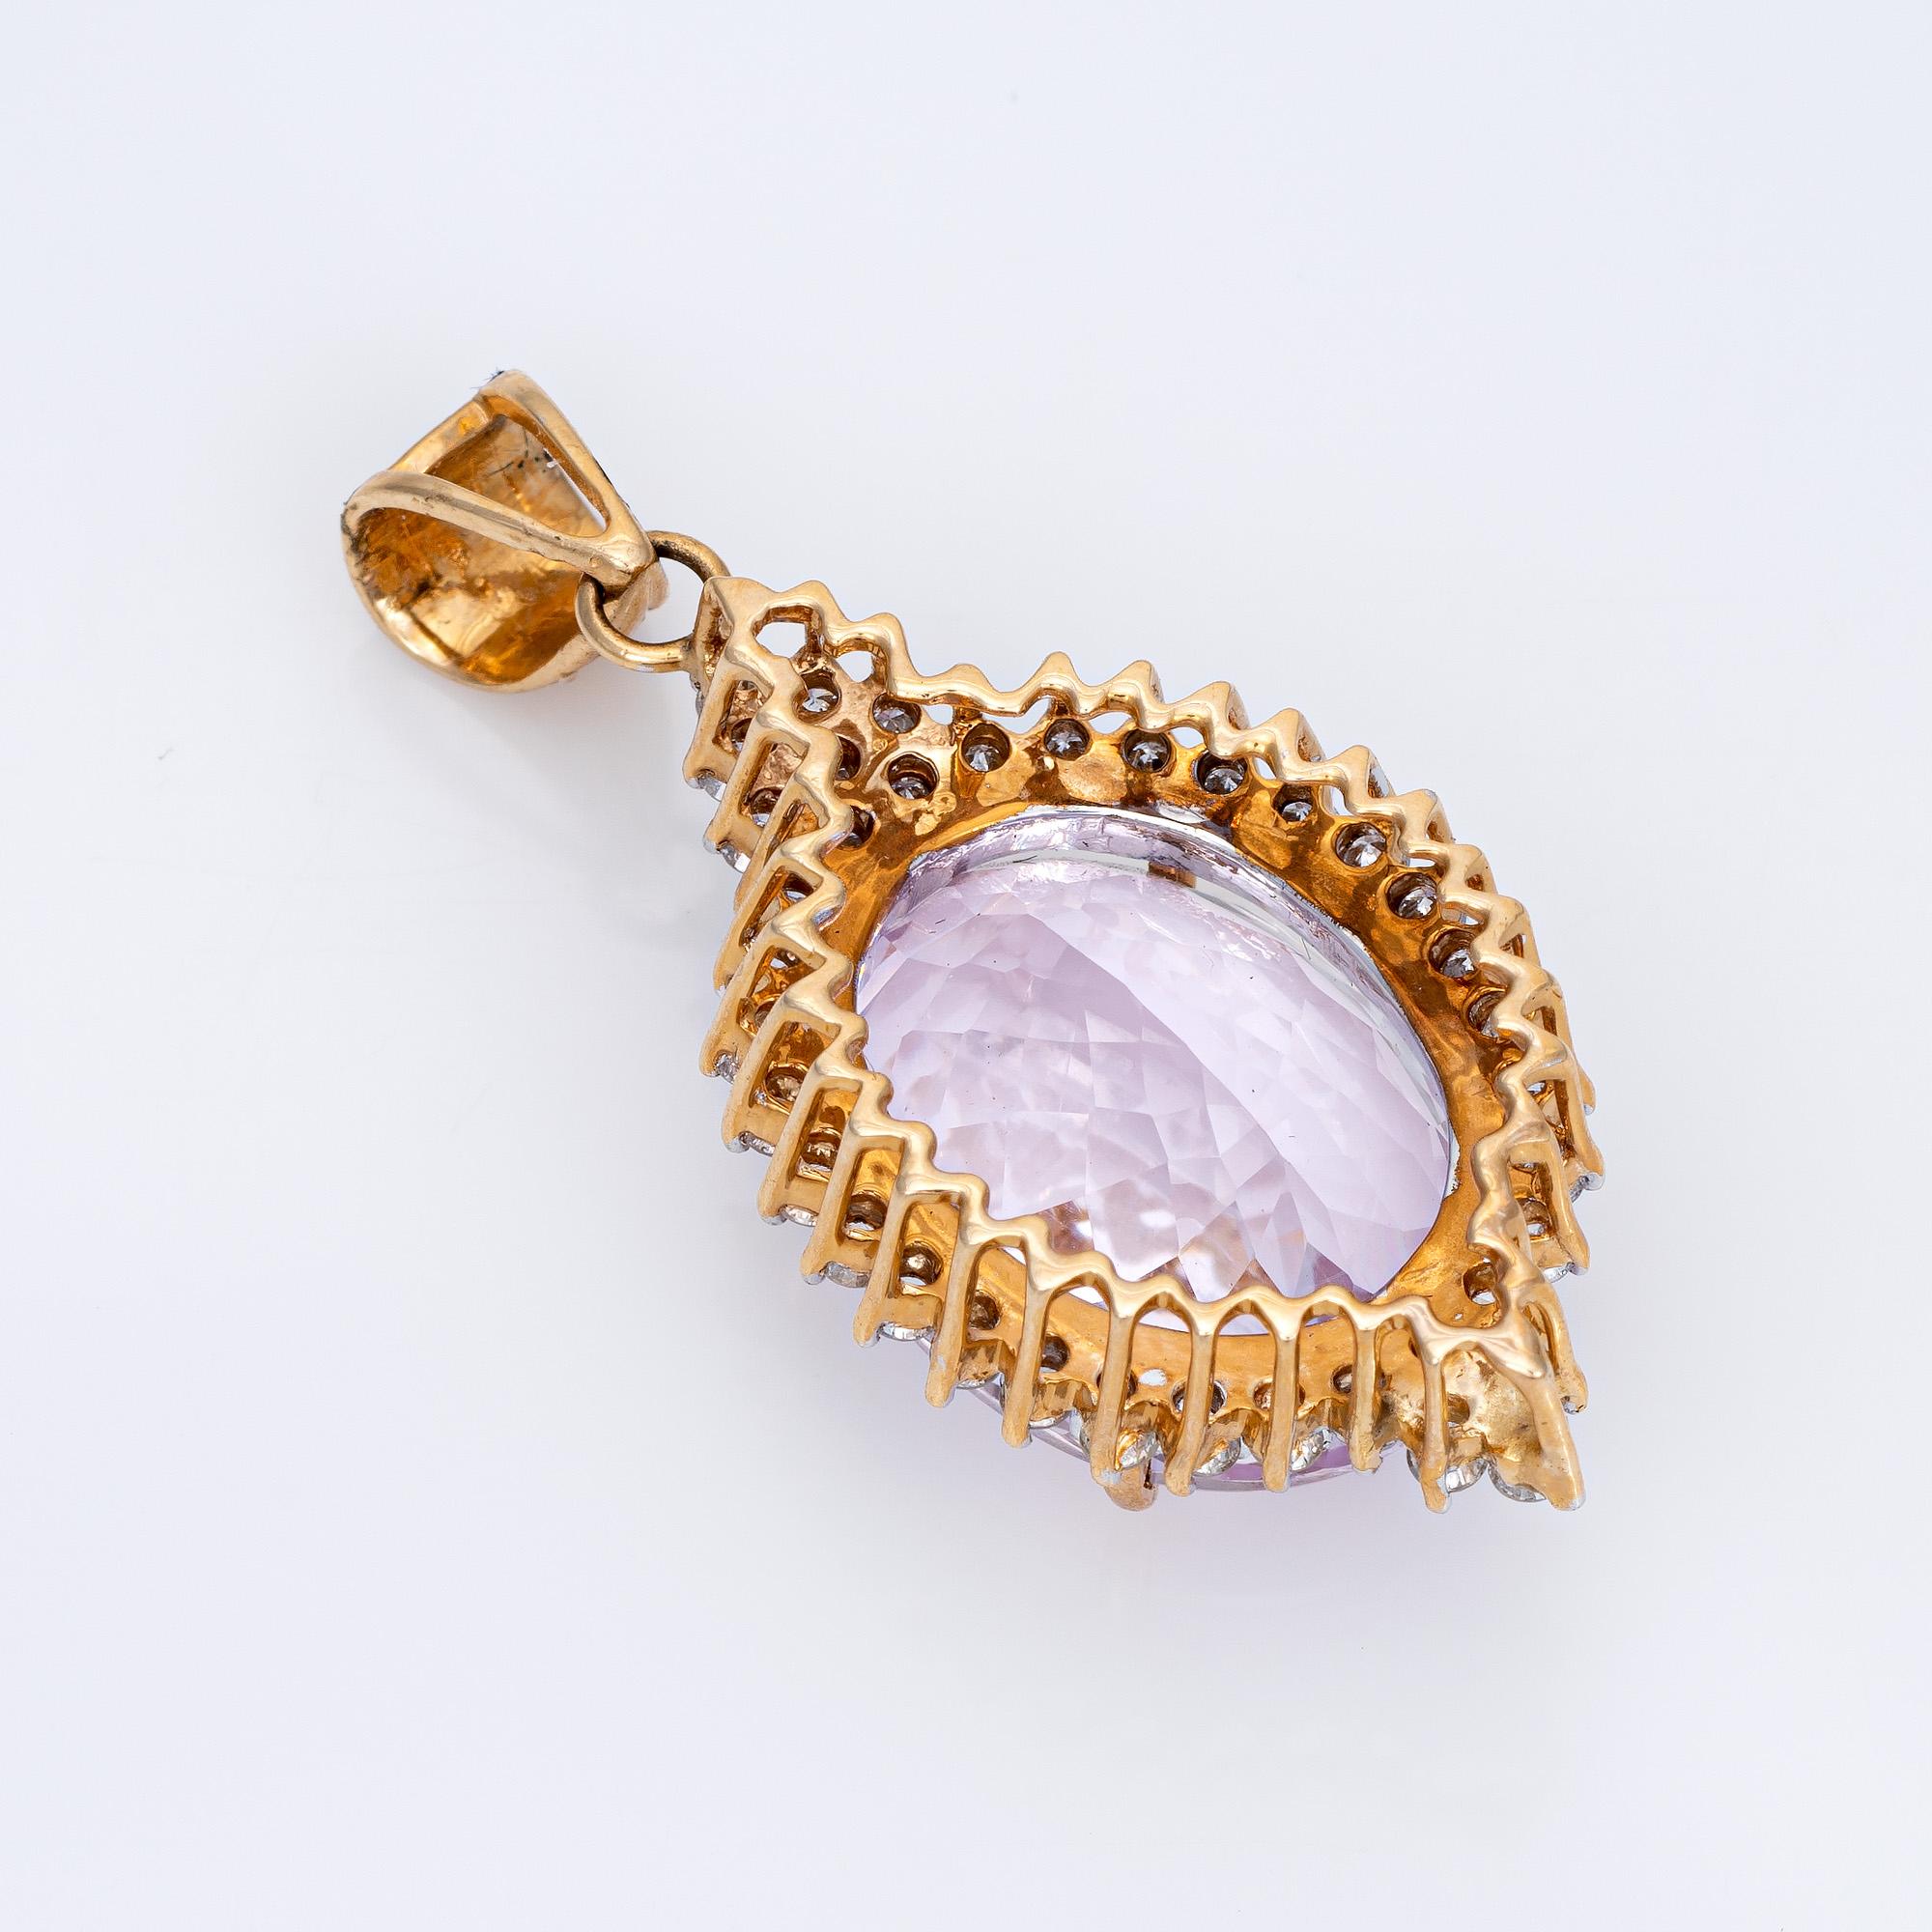 Finely detailed vintage kunzite & diamond pendant crafted in 14 karat yellow gold (circa 1980s to 1990s). 

Oval faceted kunzite is estimated at 17.50 carats (in very good condition and free of cracks or chips). 38 round brilliant cut diamonds are